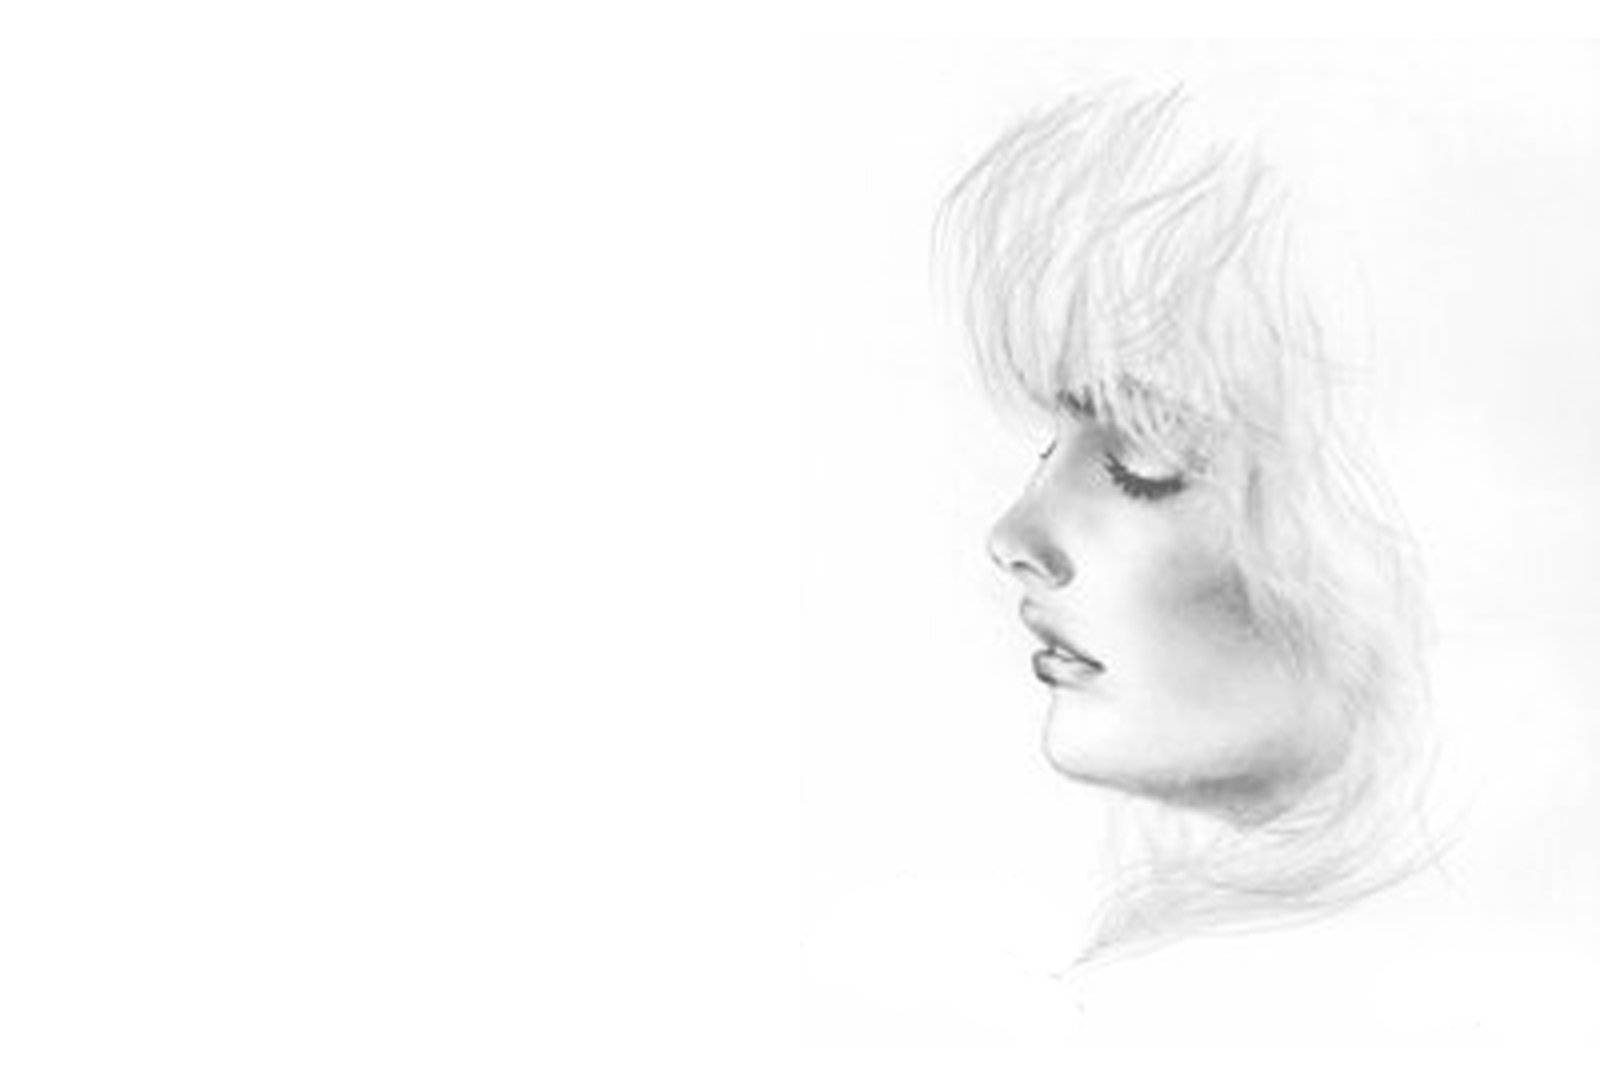 white, Sketches, Grayscale, Drawings, Faces, White, Background Wallpaper